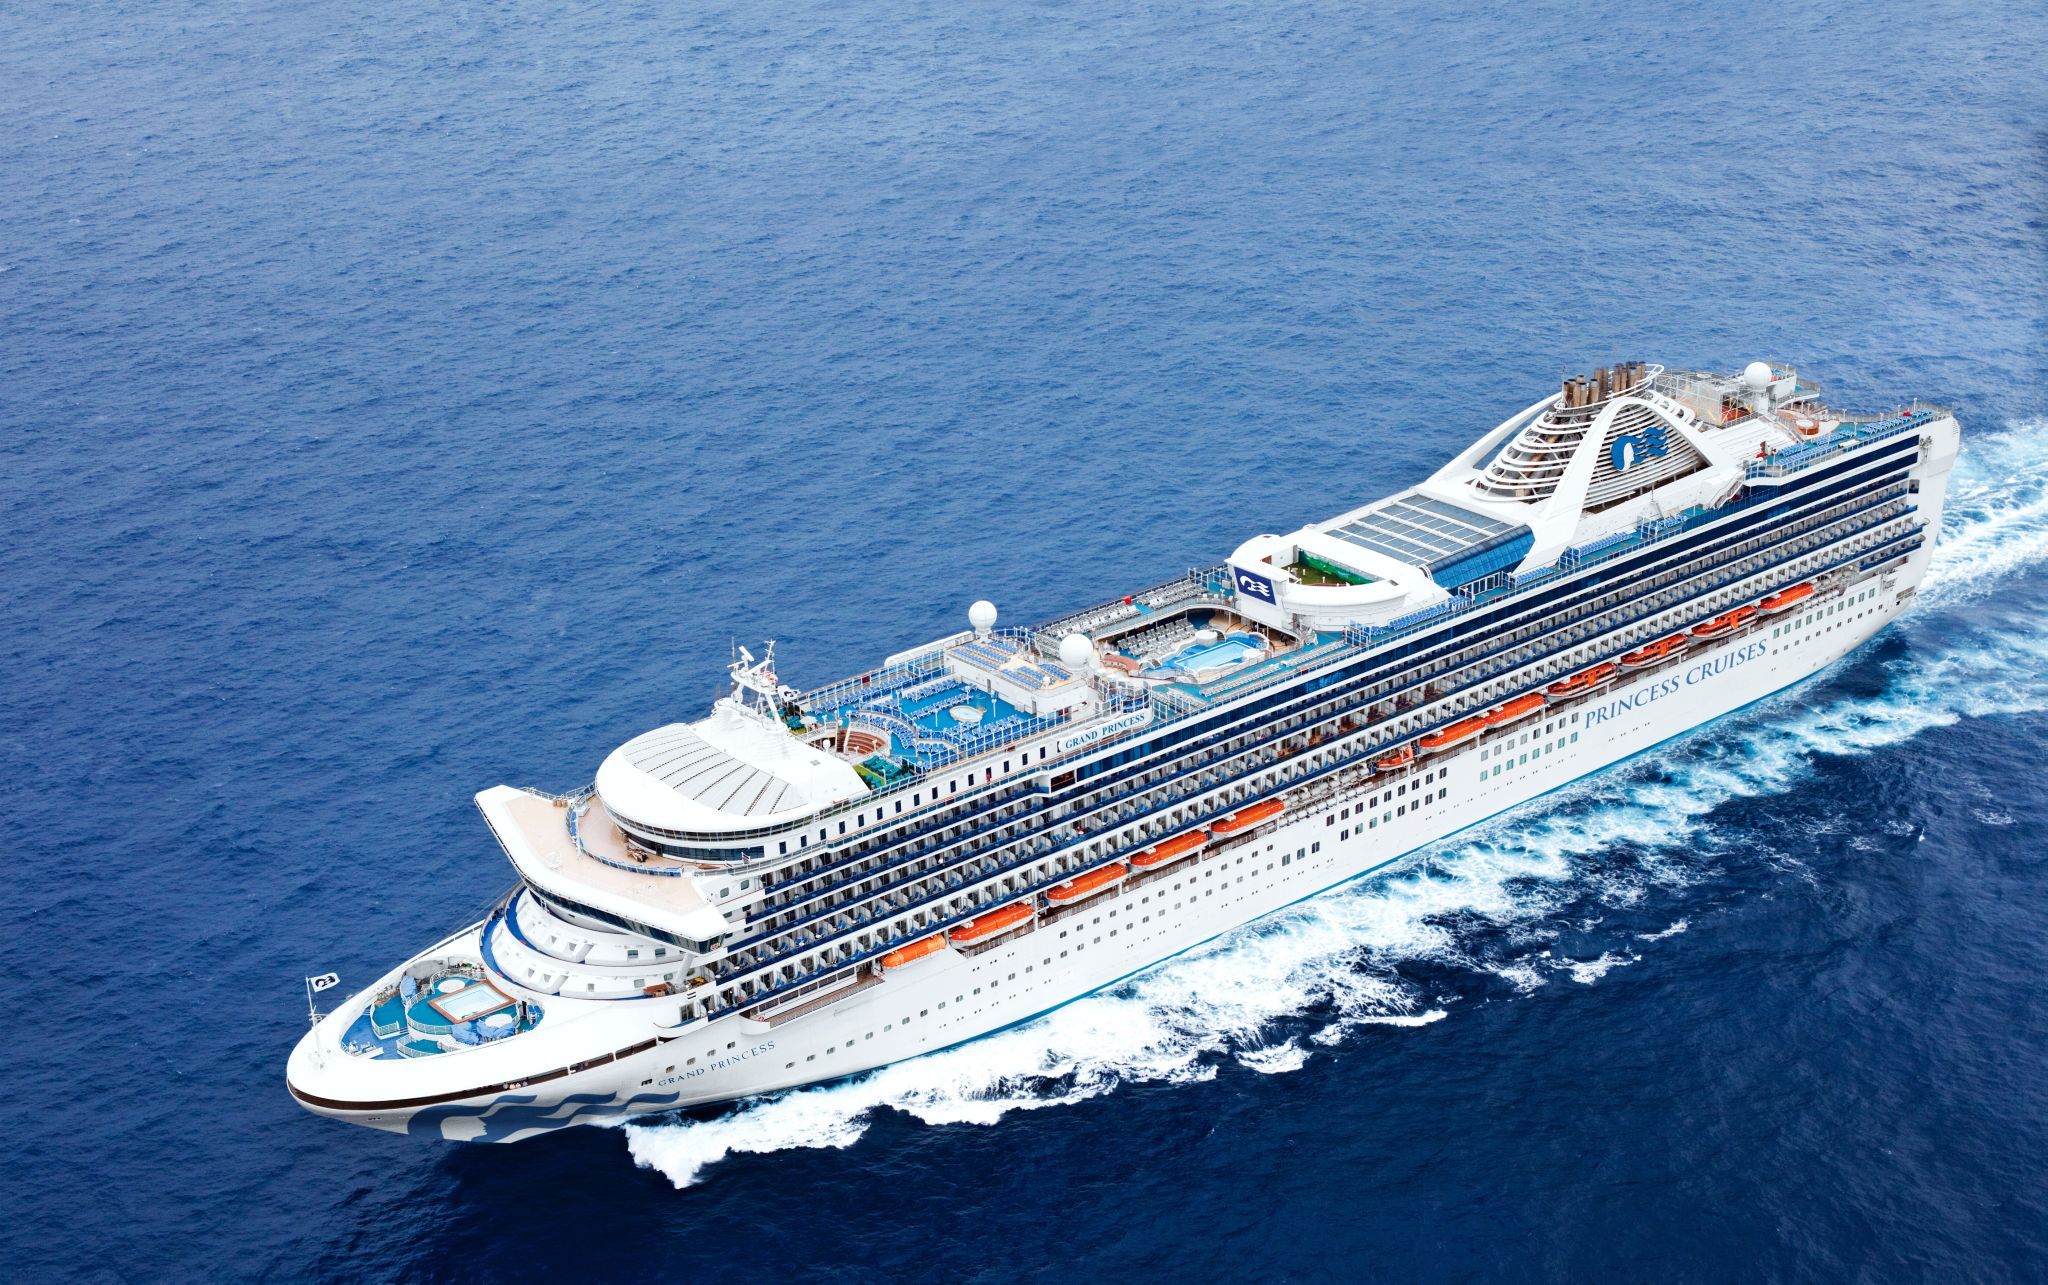 grand princess cruise ship specifications